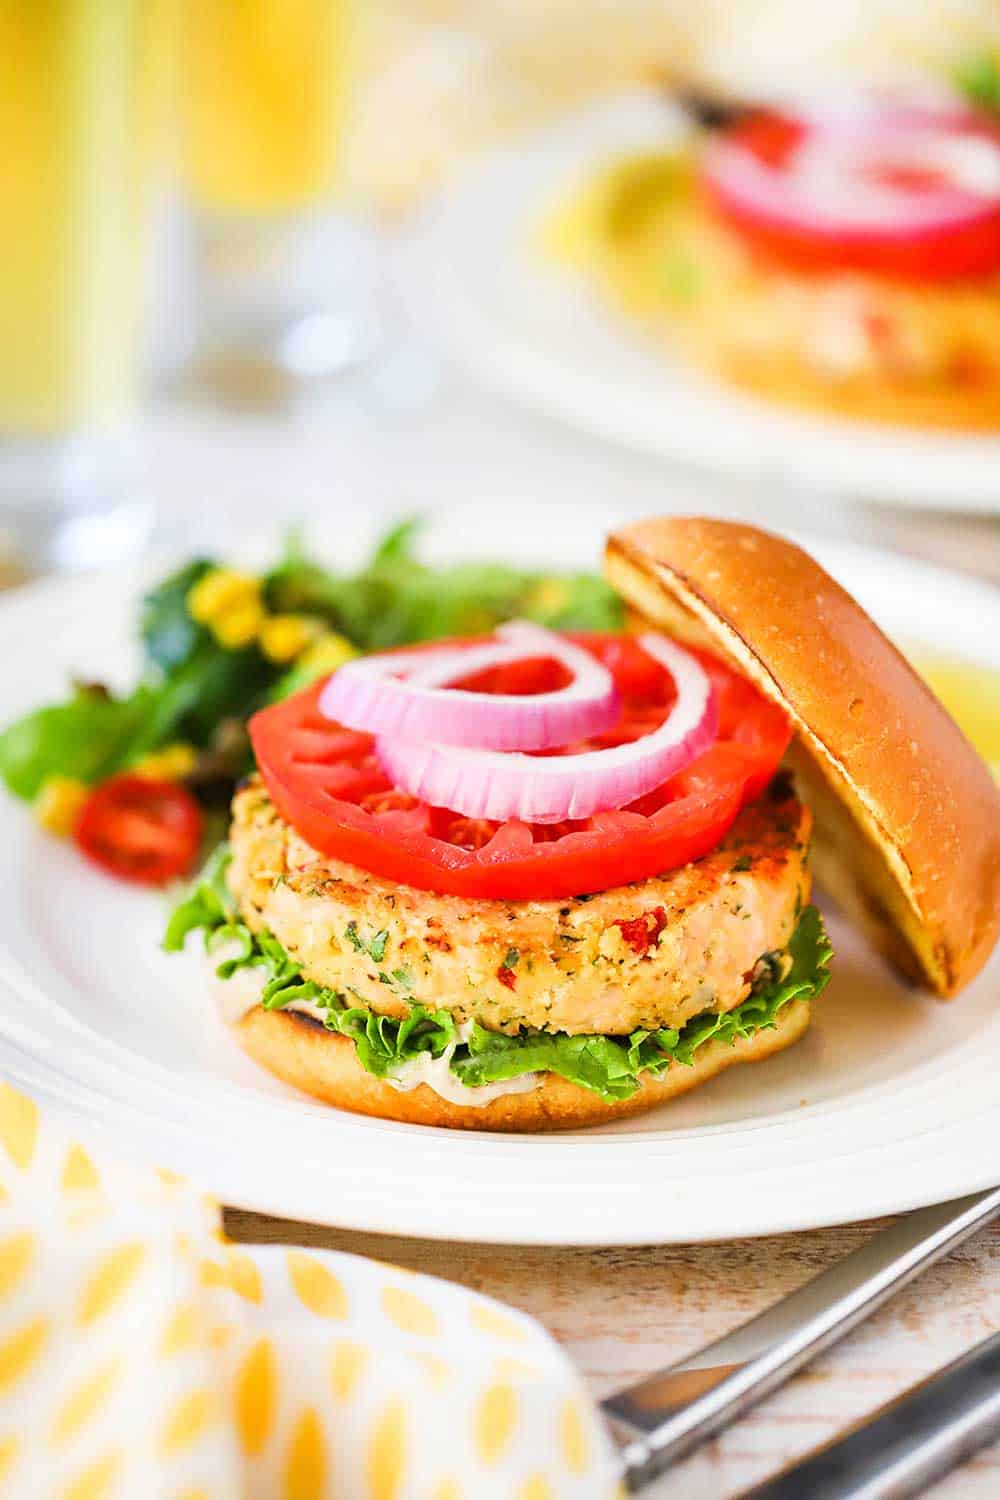 A fully cooked salmon burger on a hamburger bun, garnished with lettuce, tomato, and red onion all sitting on a white plate. 